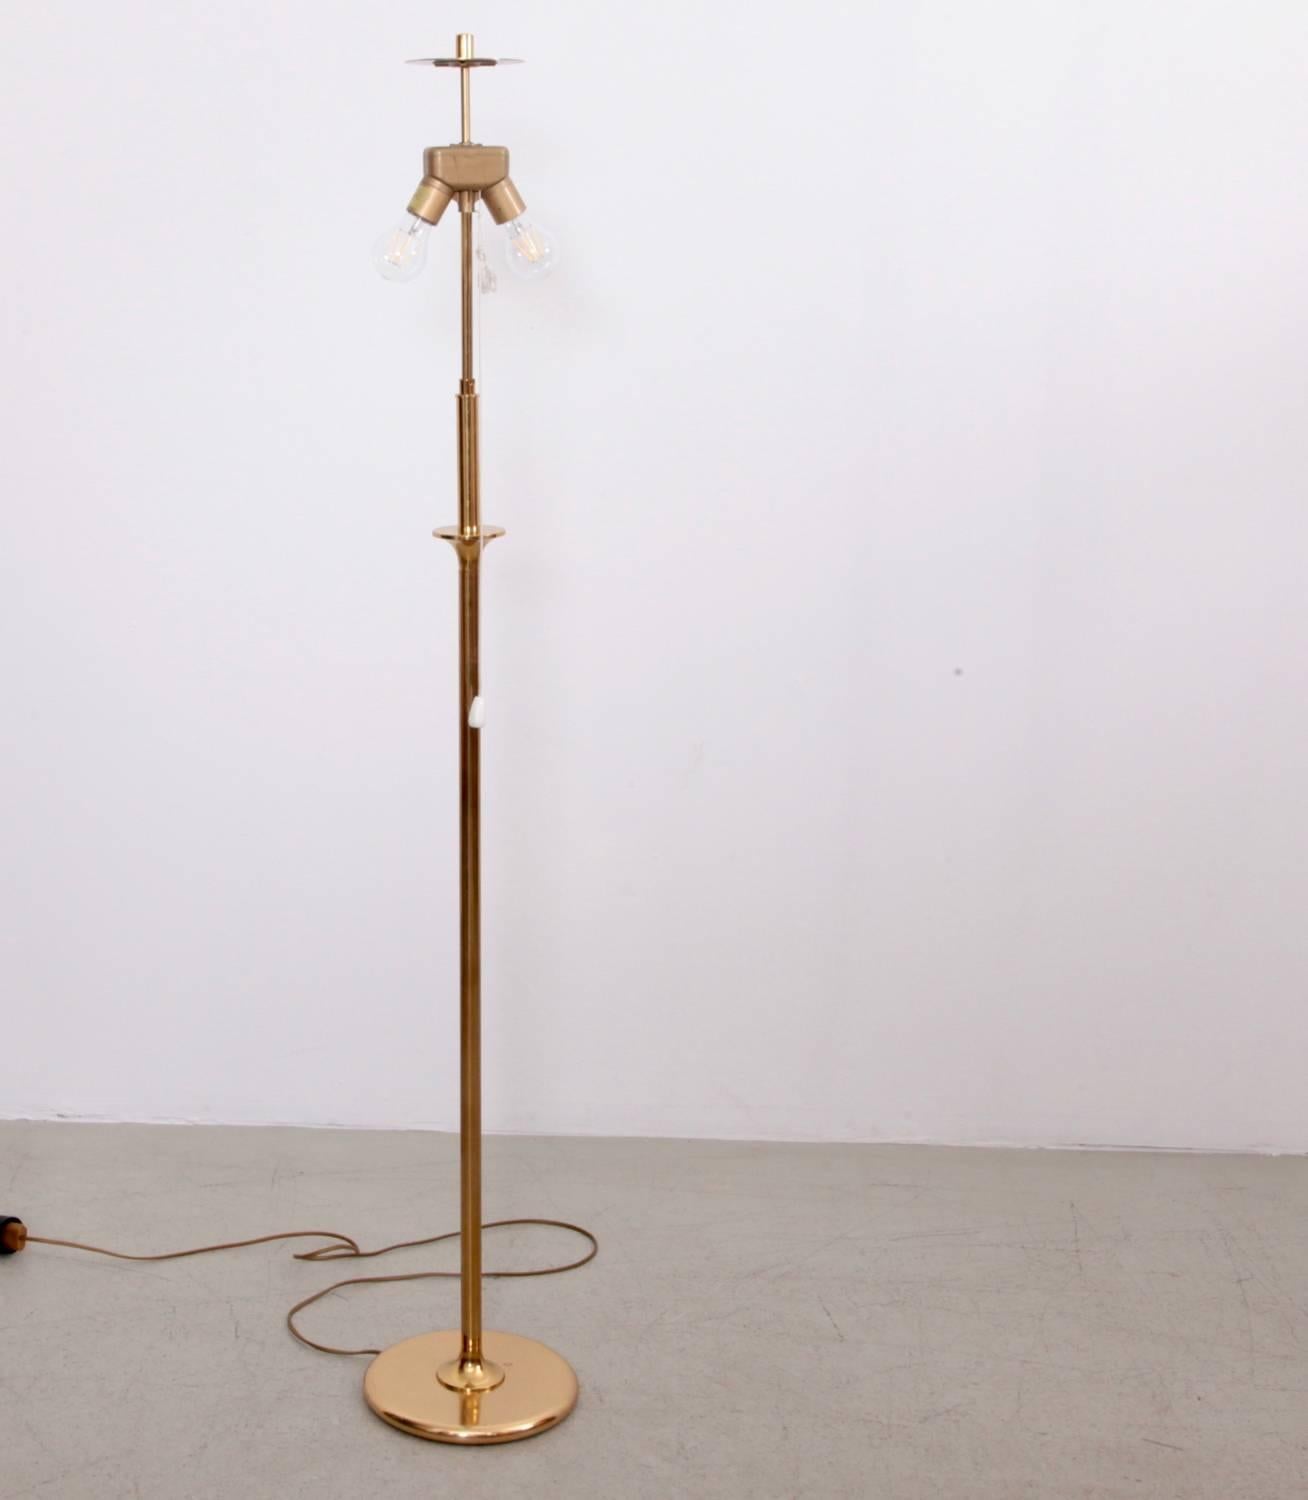 Late 20th Century 1 of 12 1970s Brass Floor Lamps by Cosack Lights, Germany For Sale